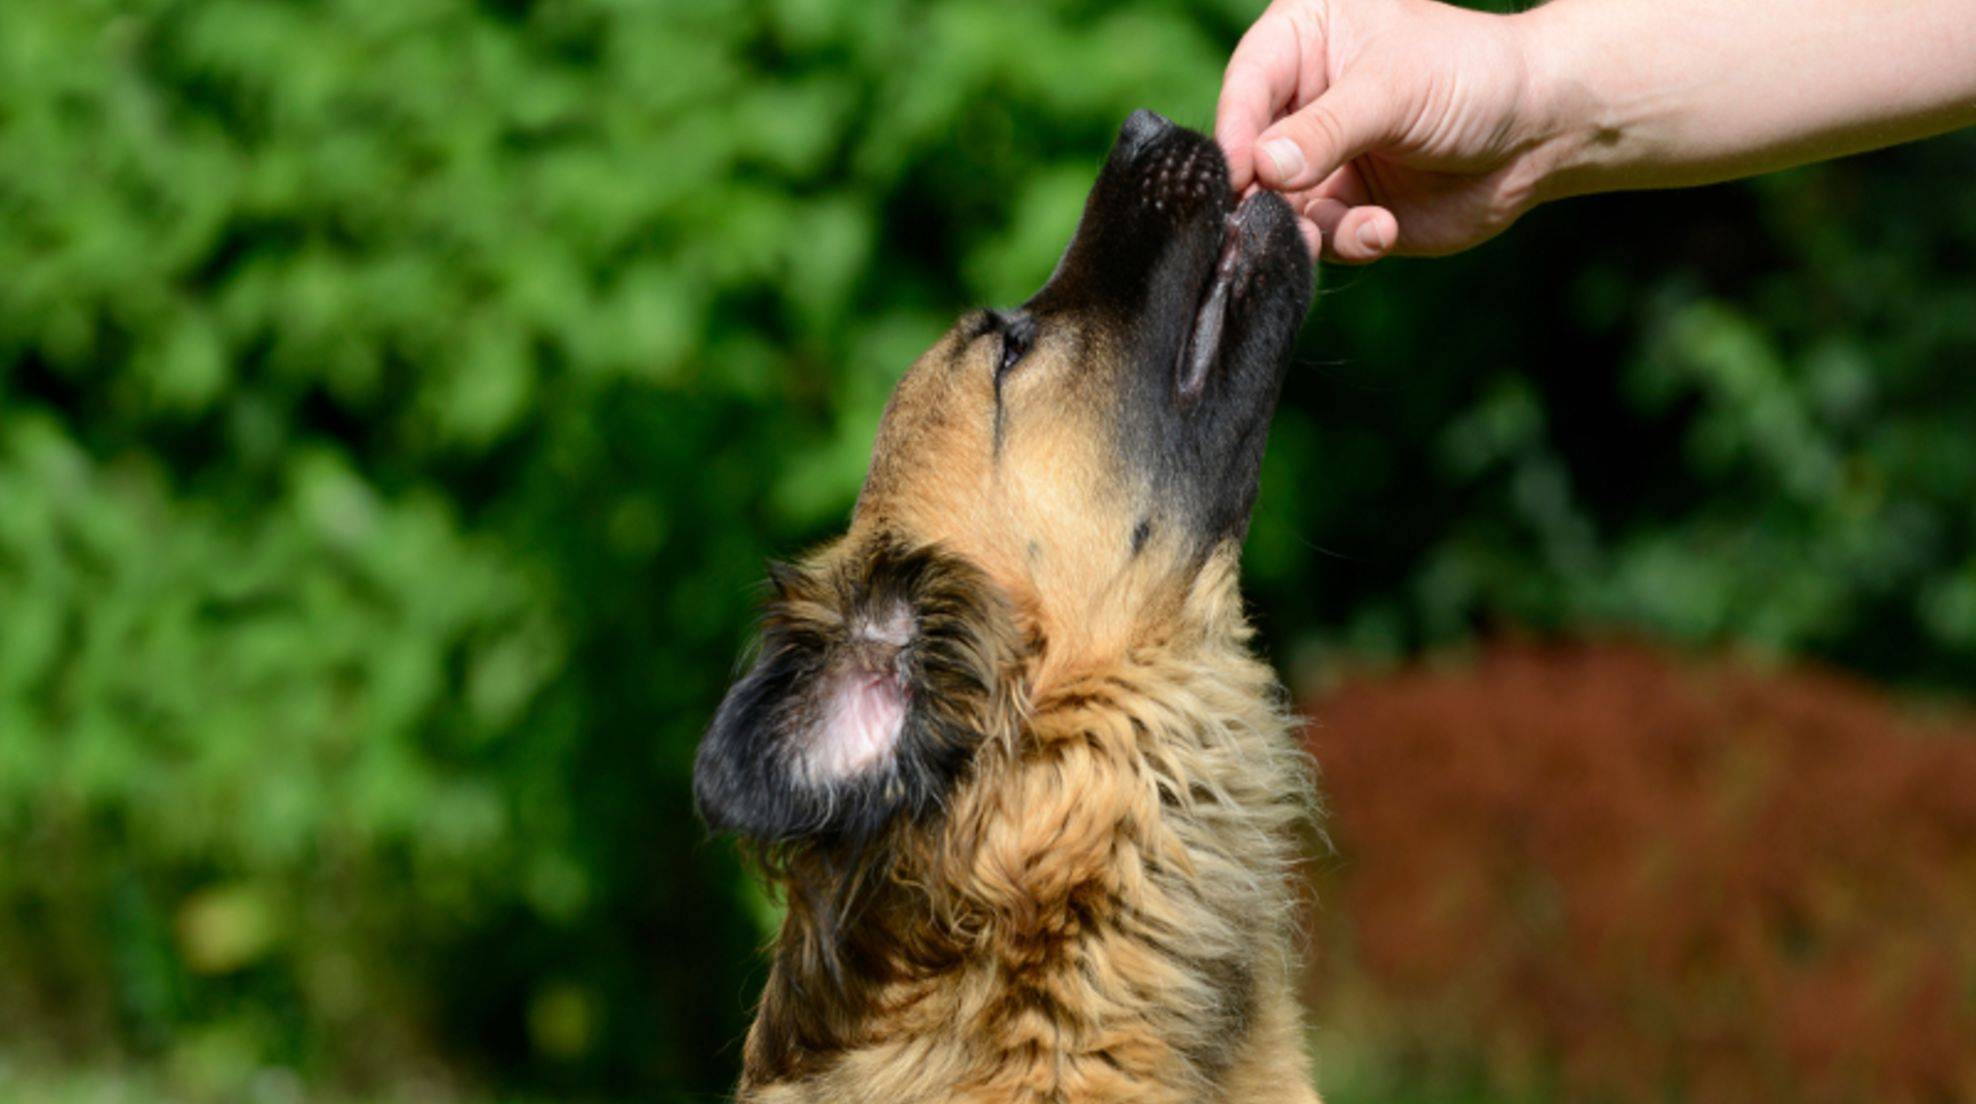 Praising dogs properly: That's the way to go